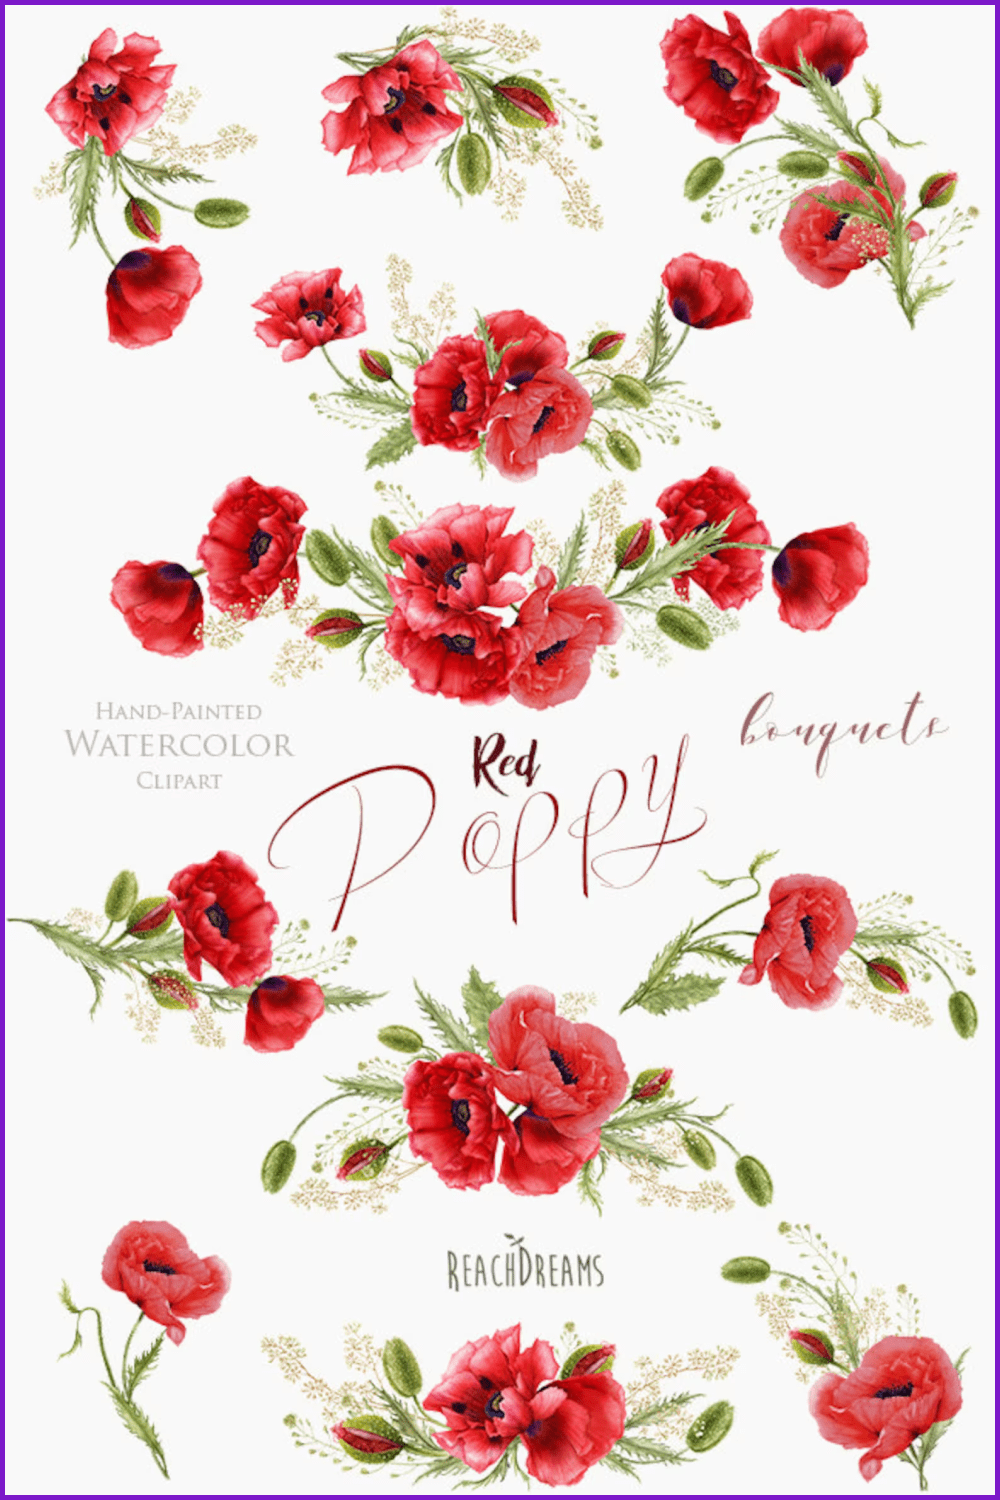 Detailed hand-painted watercolor floral bouquets.